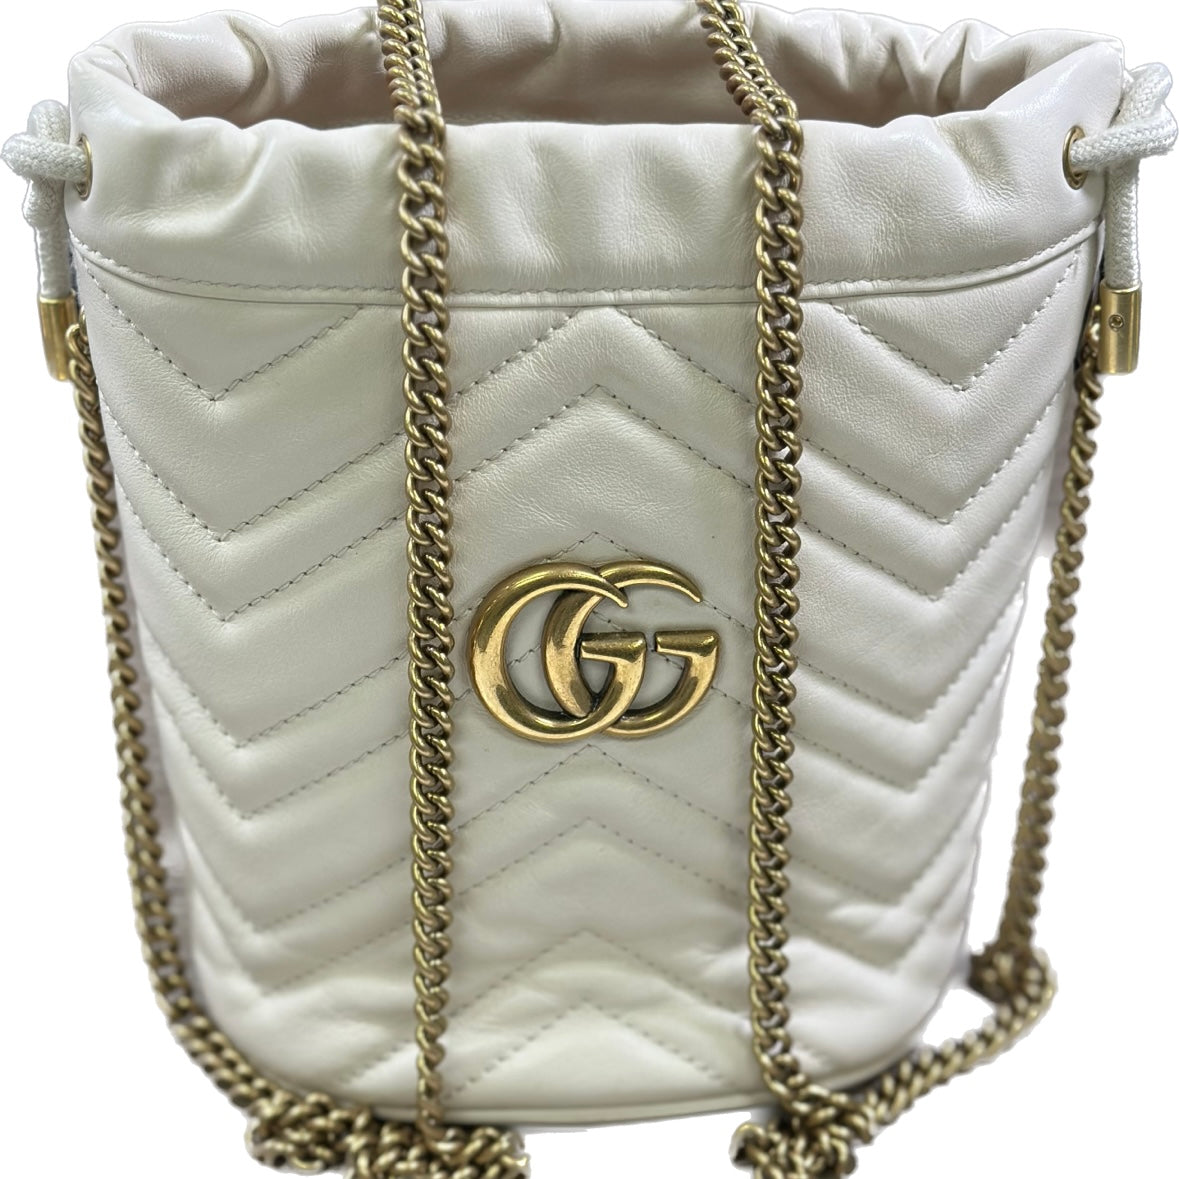 GG Marmont mini bag in white leather